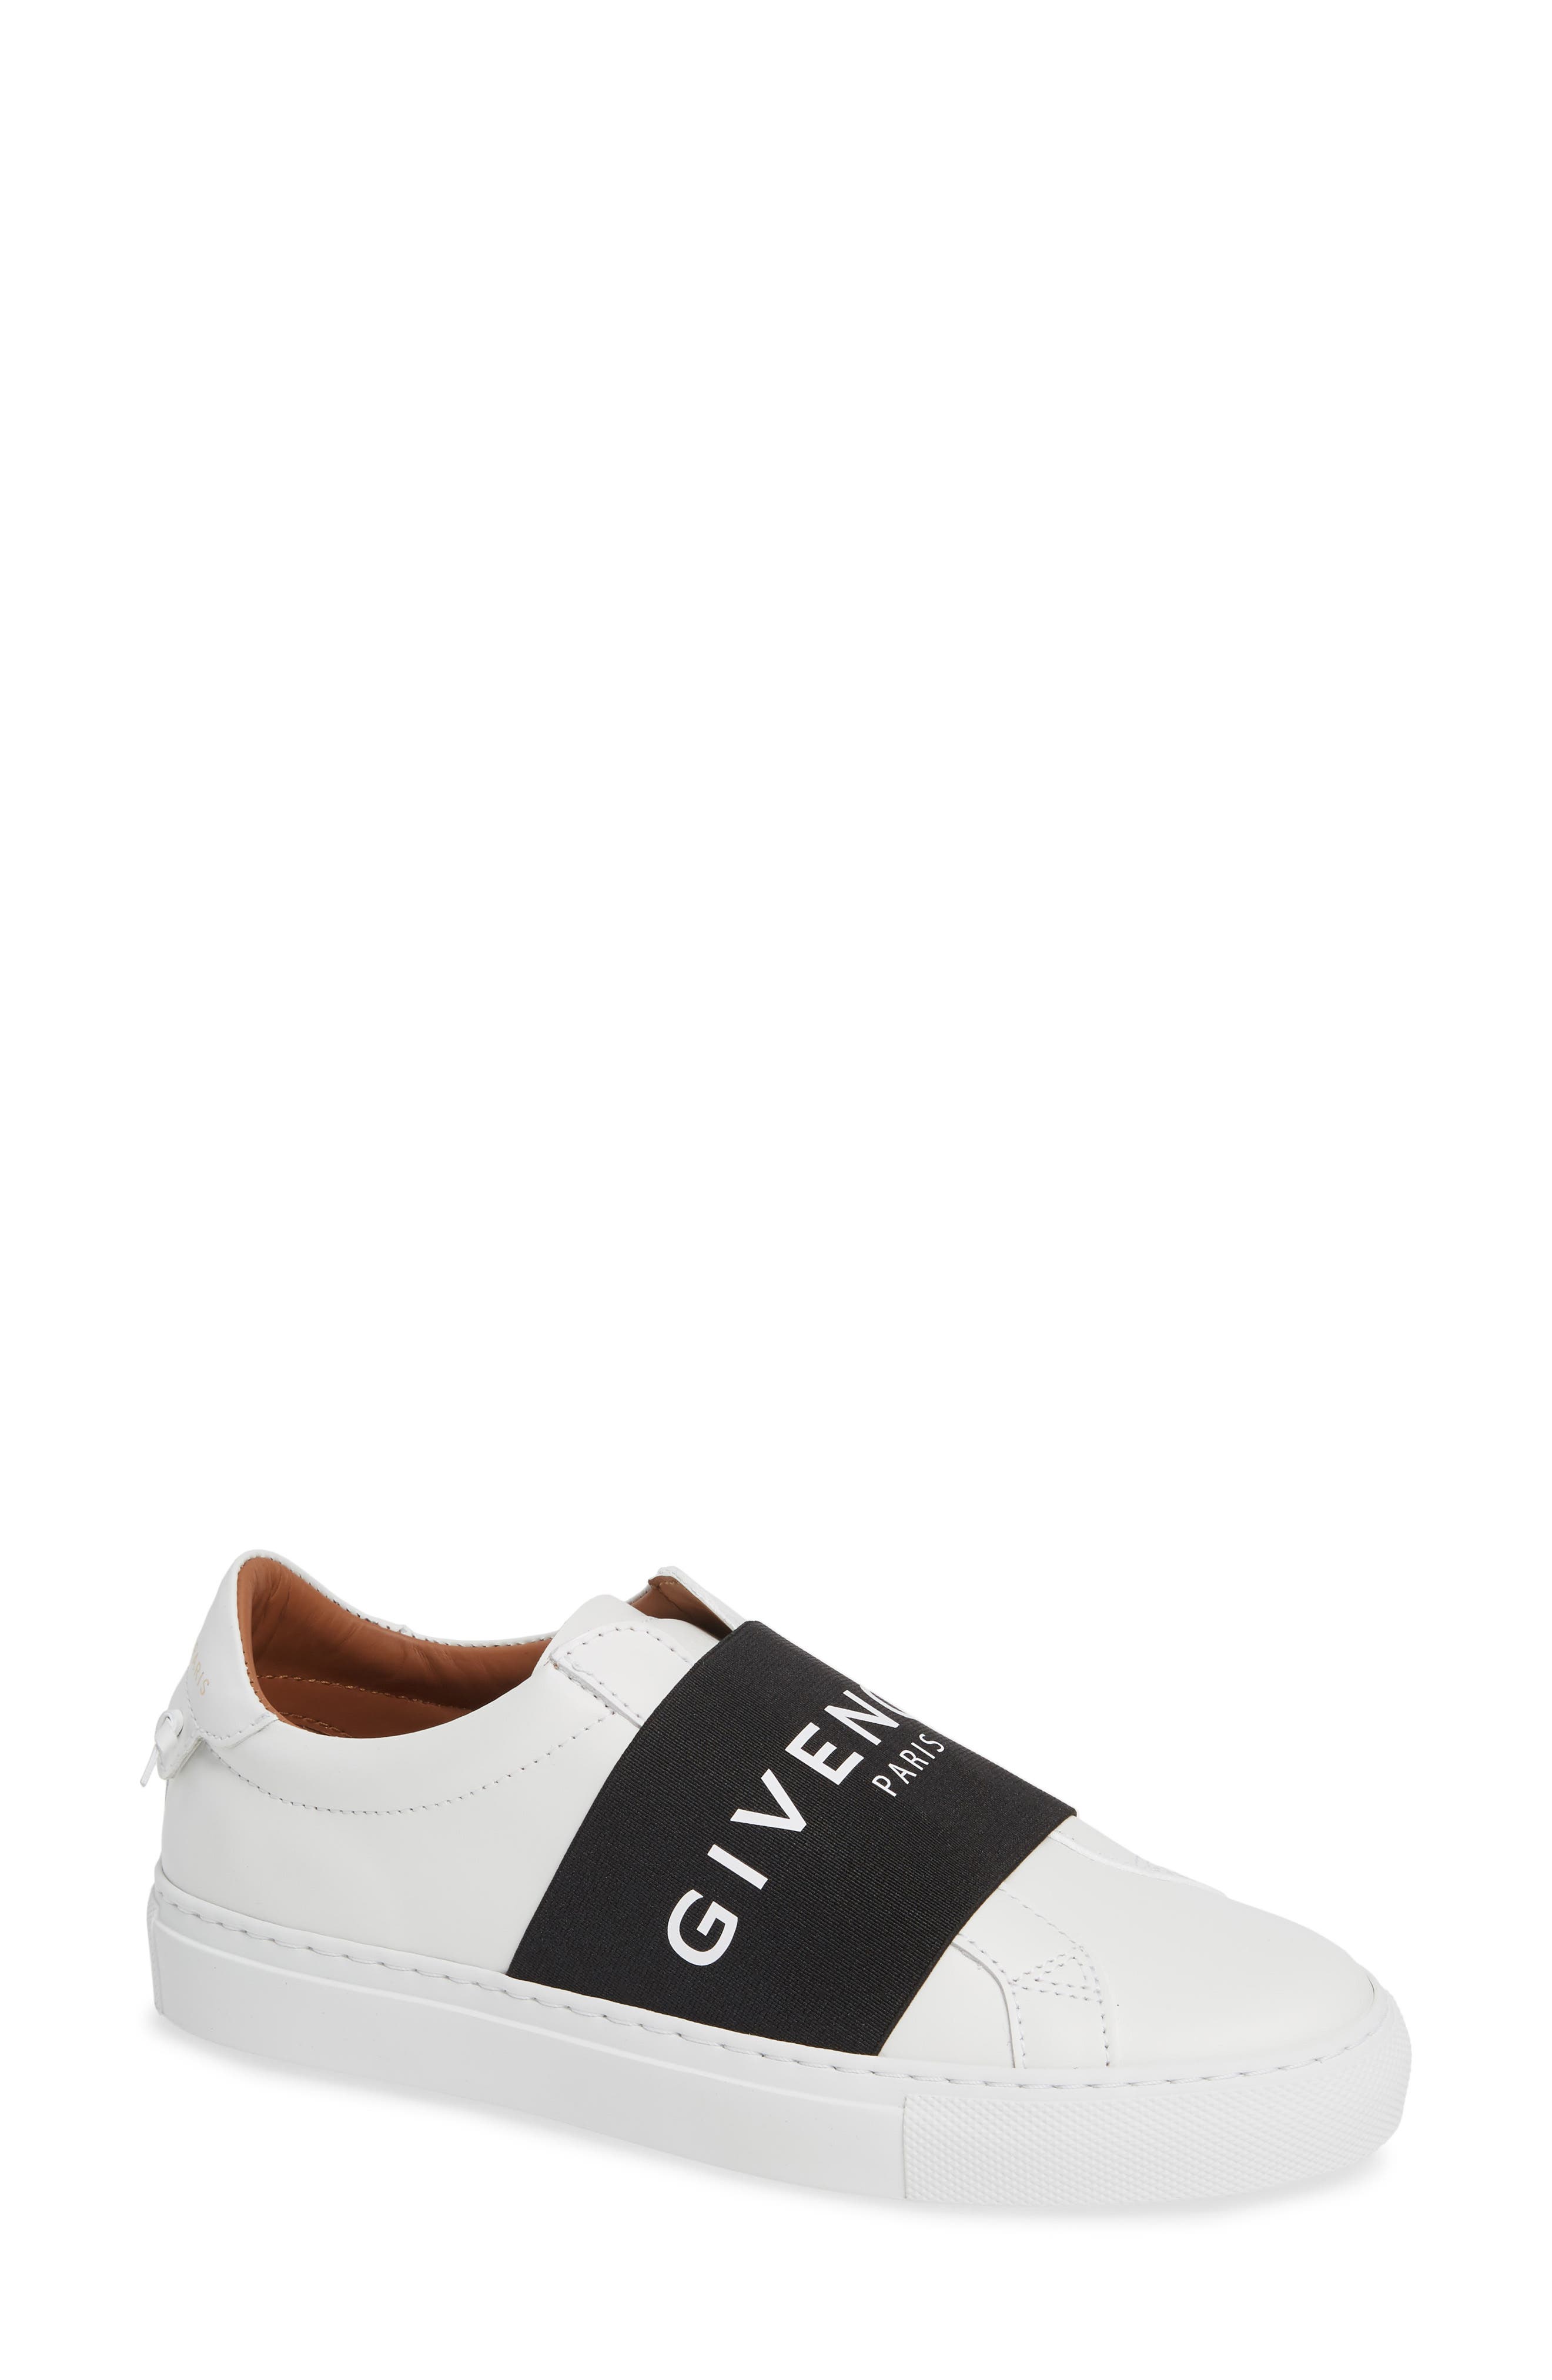 nordstrom givenchy sneakers